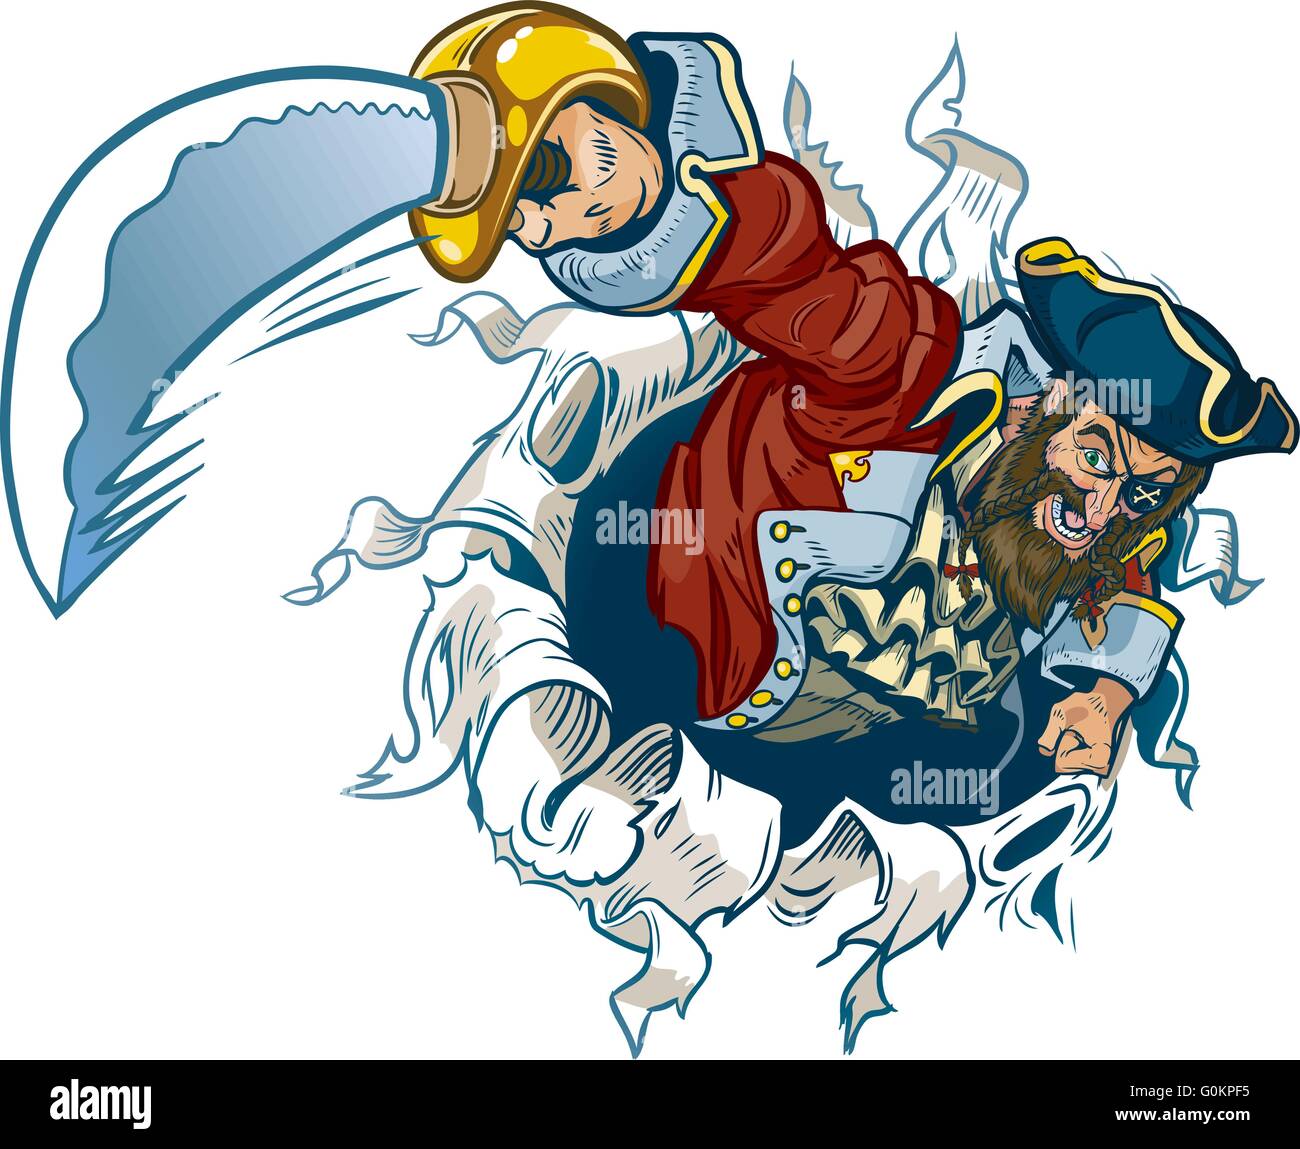 Vector cartoon clip art illustration of a pirate ripping out of the background, brandishing a cutlass. Makes a great mascot! Stock Vector